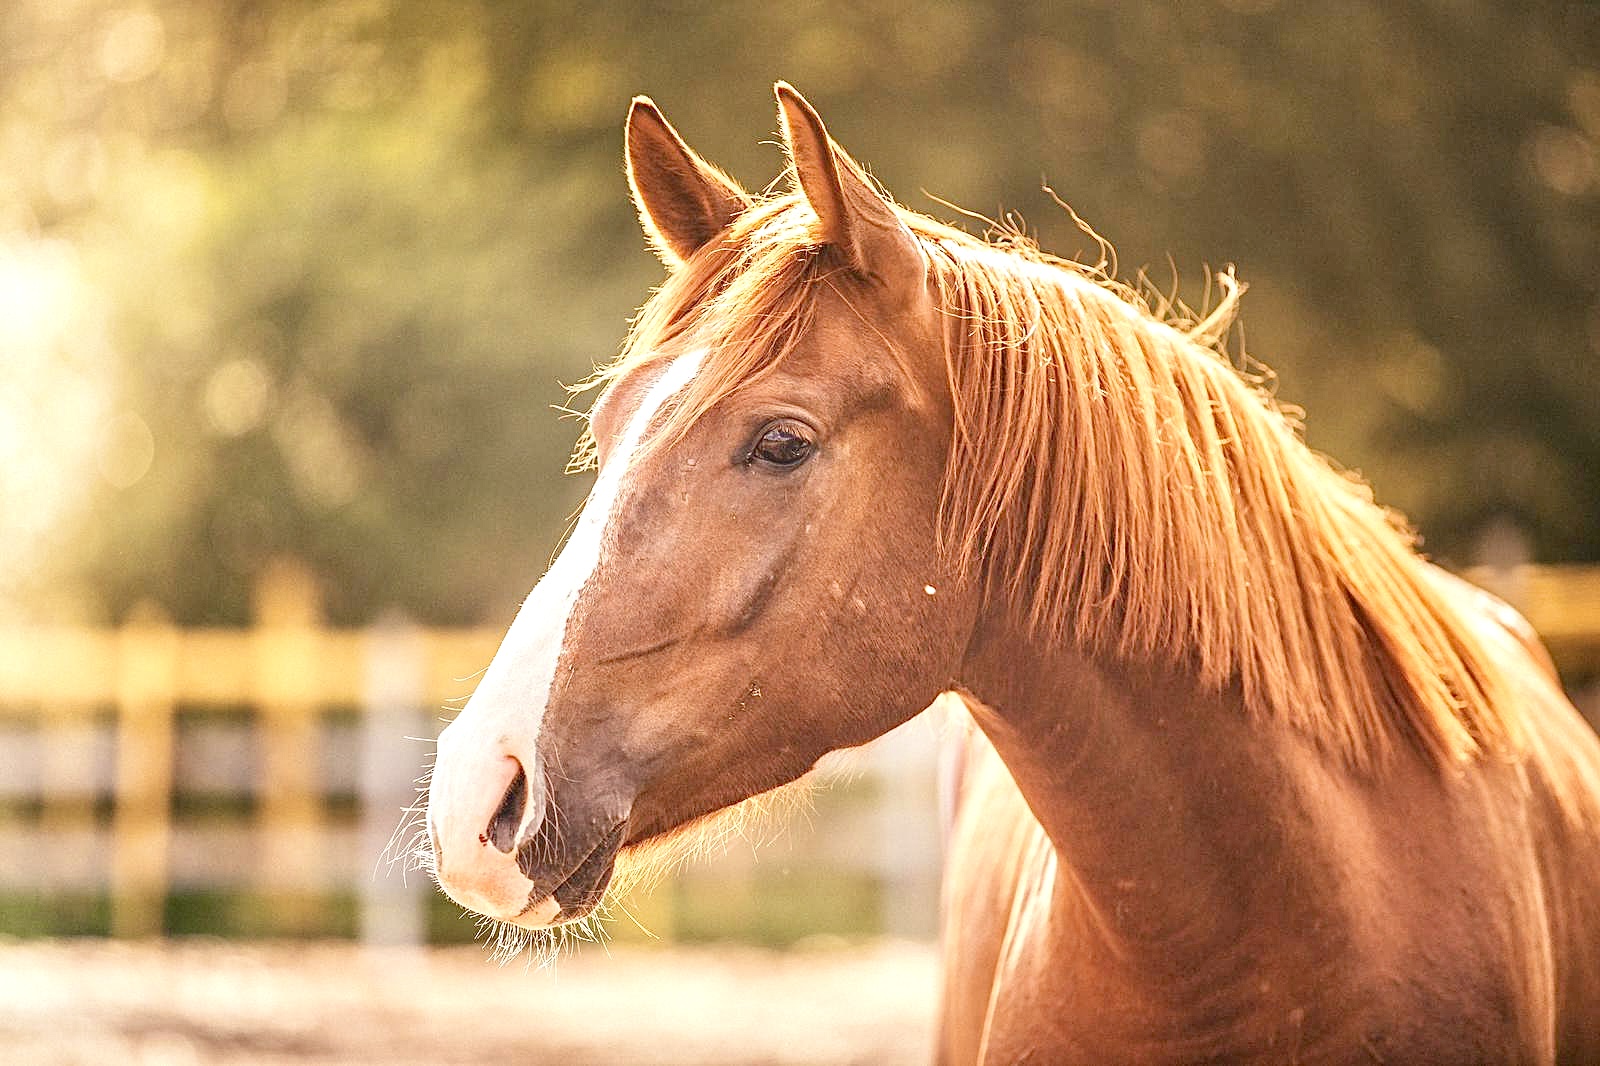 The Horse Transportation Safety Act Was Recently Reintroduced In The U.S. With 105 Bipartisan Co-Sponsors